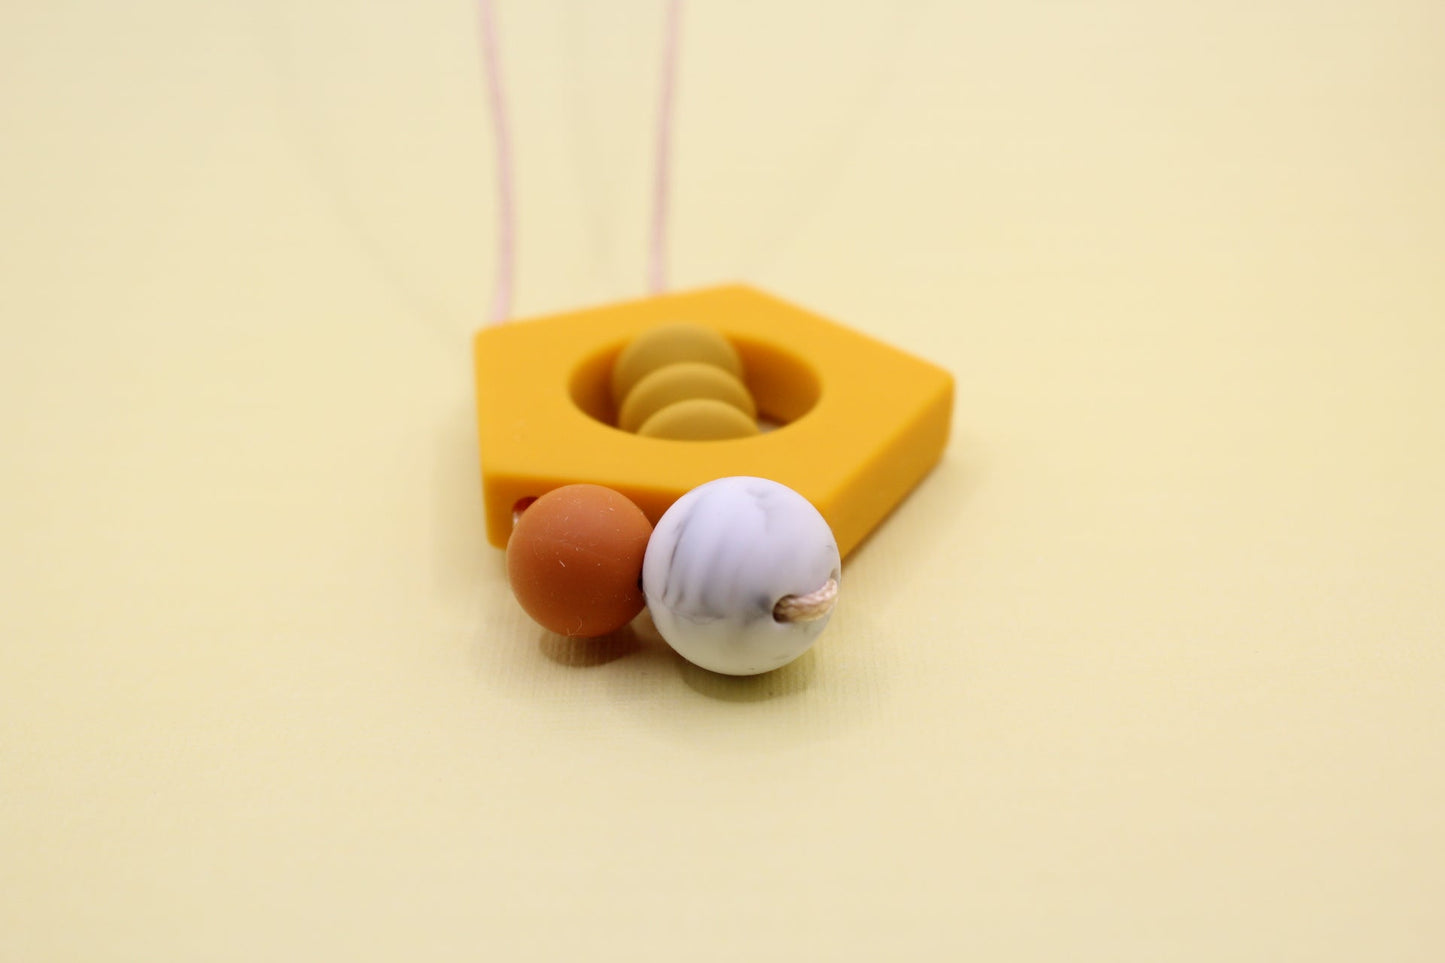 'Penny' Amber Yellow Pentagon Silicone Pendant Necklace